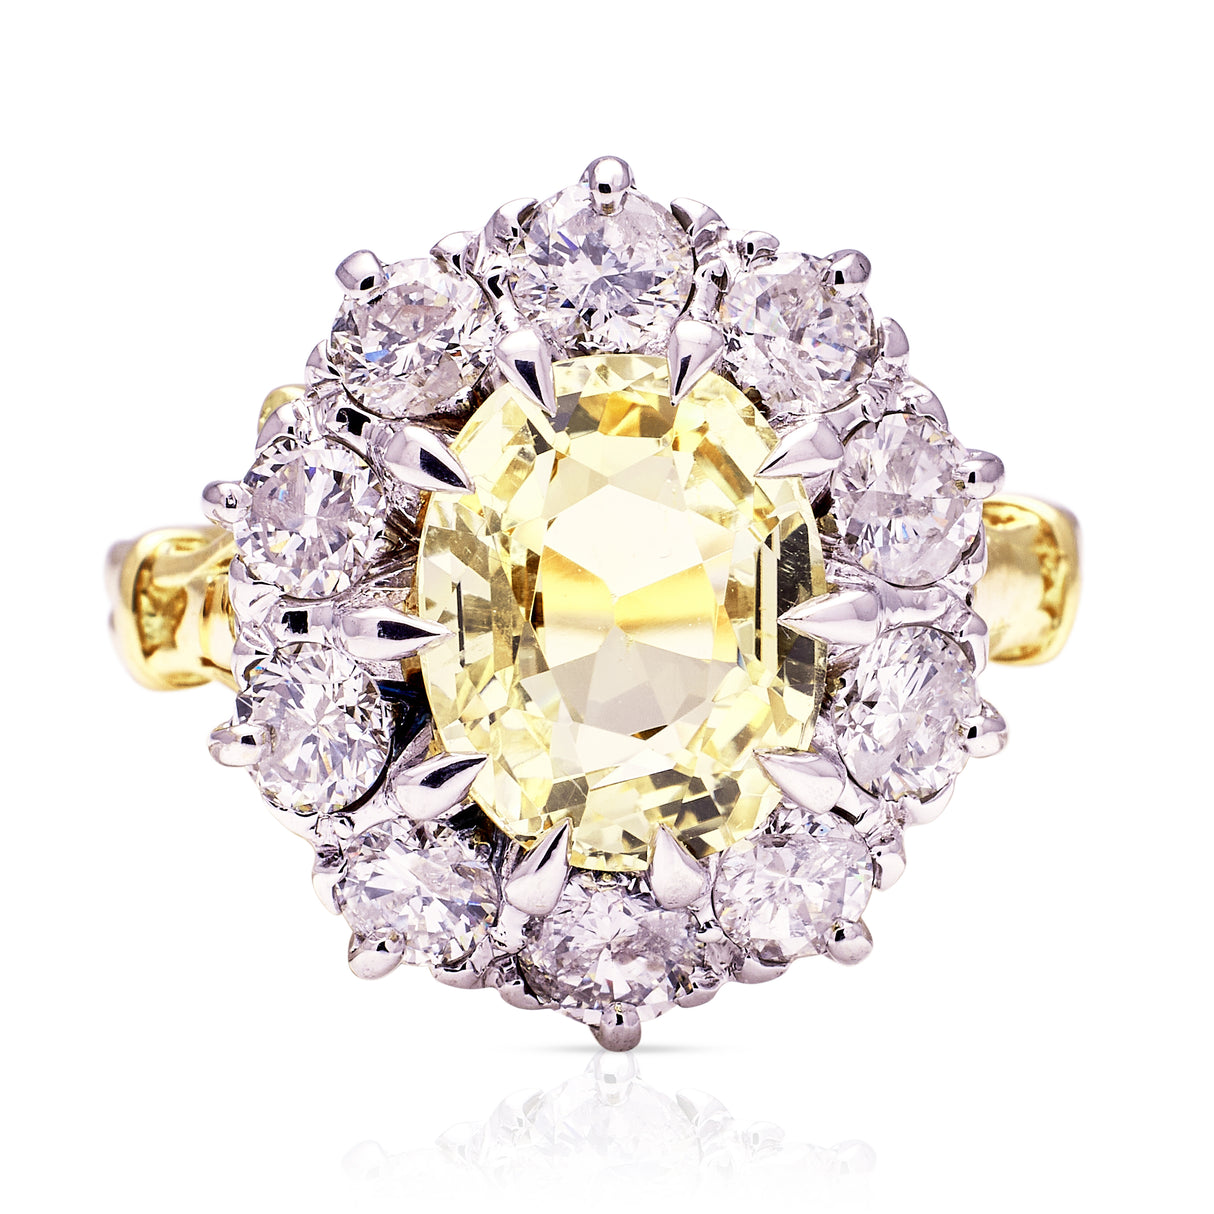 Vintage 3ct Yellow Sapphire and Diamond Ring, 18ct Yellow Gold front view